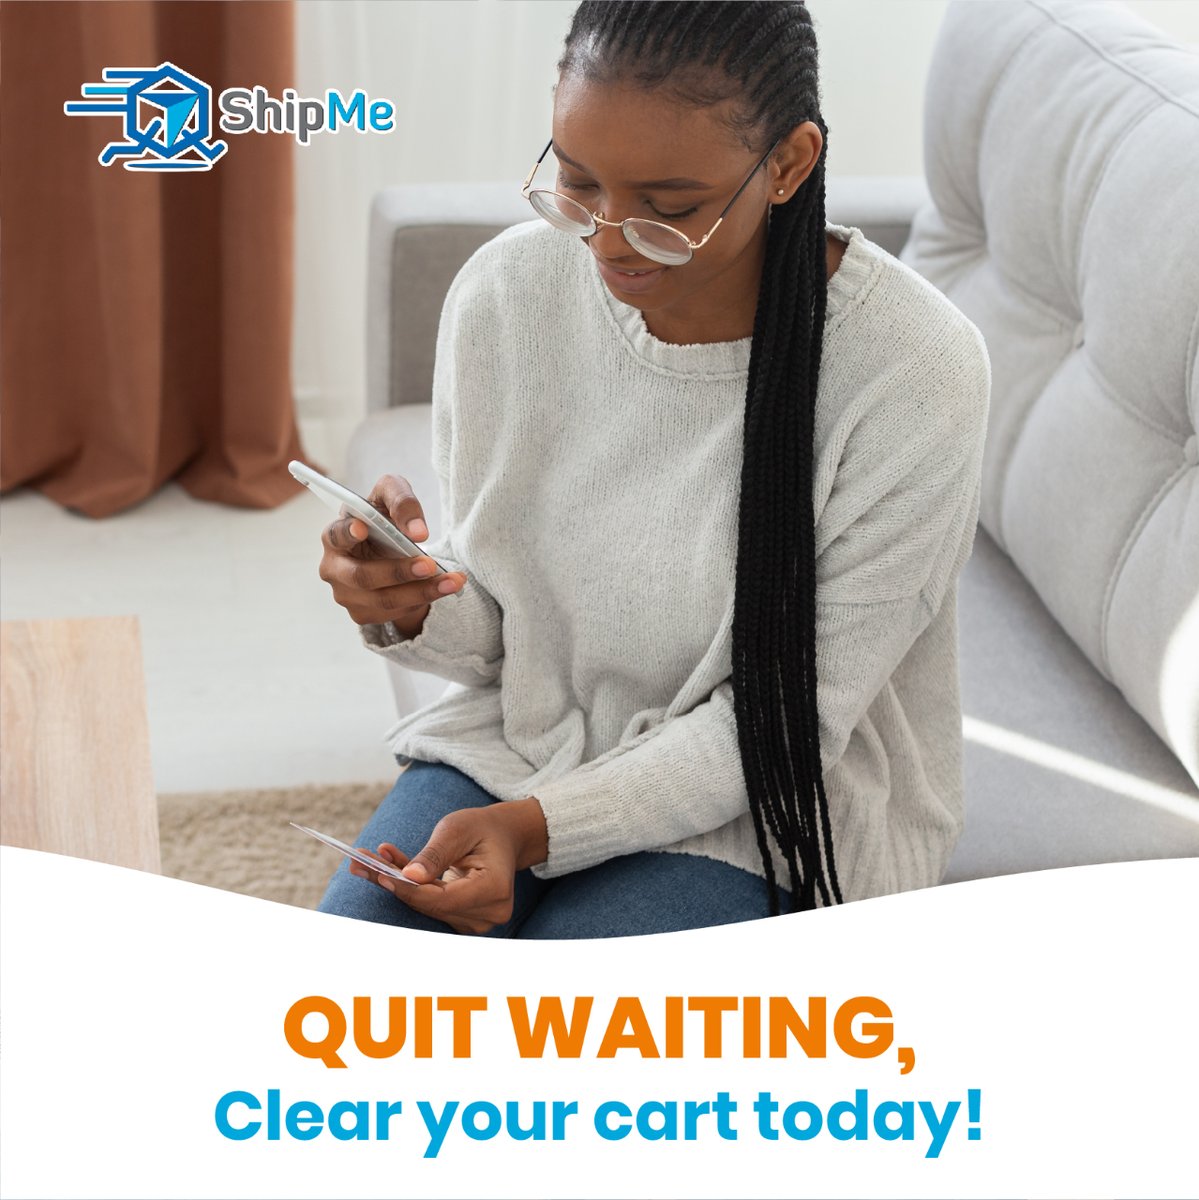 It's been some time since you last indulged yourself. Why not clear your cart today?

#Shipmeja #IslandwideBuyers #EcommerceAddictsJA #ReliableShippingPartner #USWarehouseService #SecureWarehousing #CustomsSimplified #BudgetFriendlyImports #ShopWithConfidence #ValueForMoney